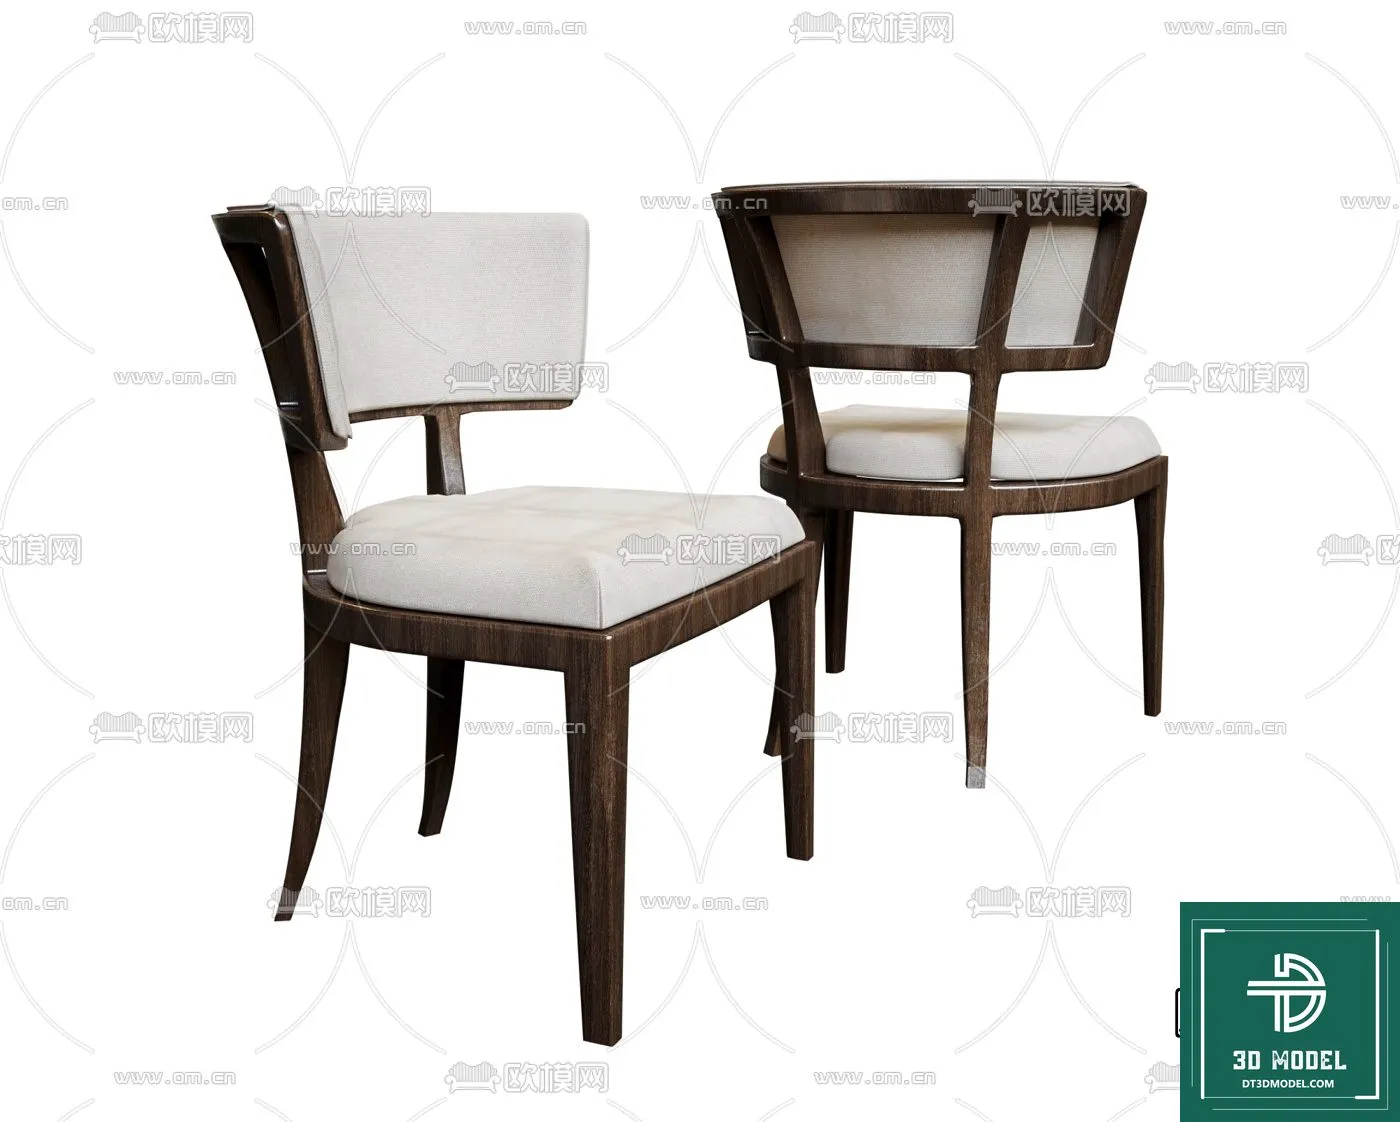 INDOCHINE STYLE – 3D MODELS – 298